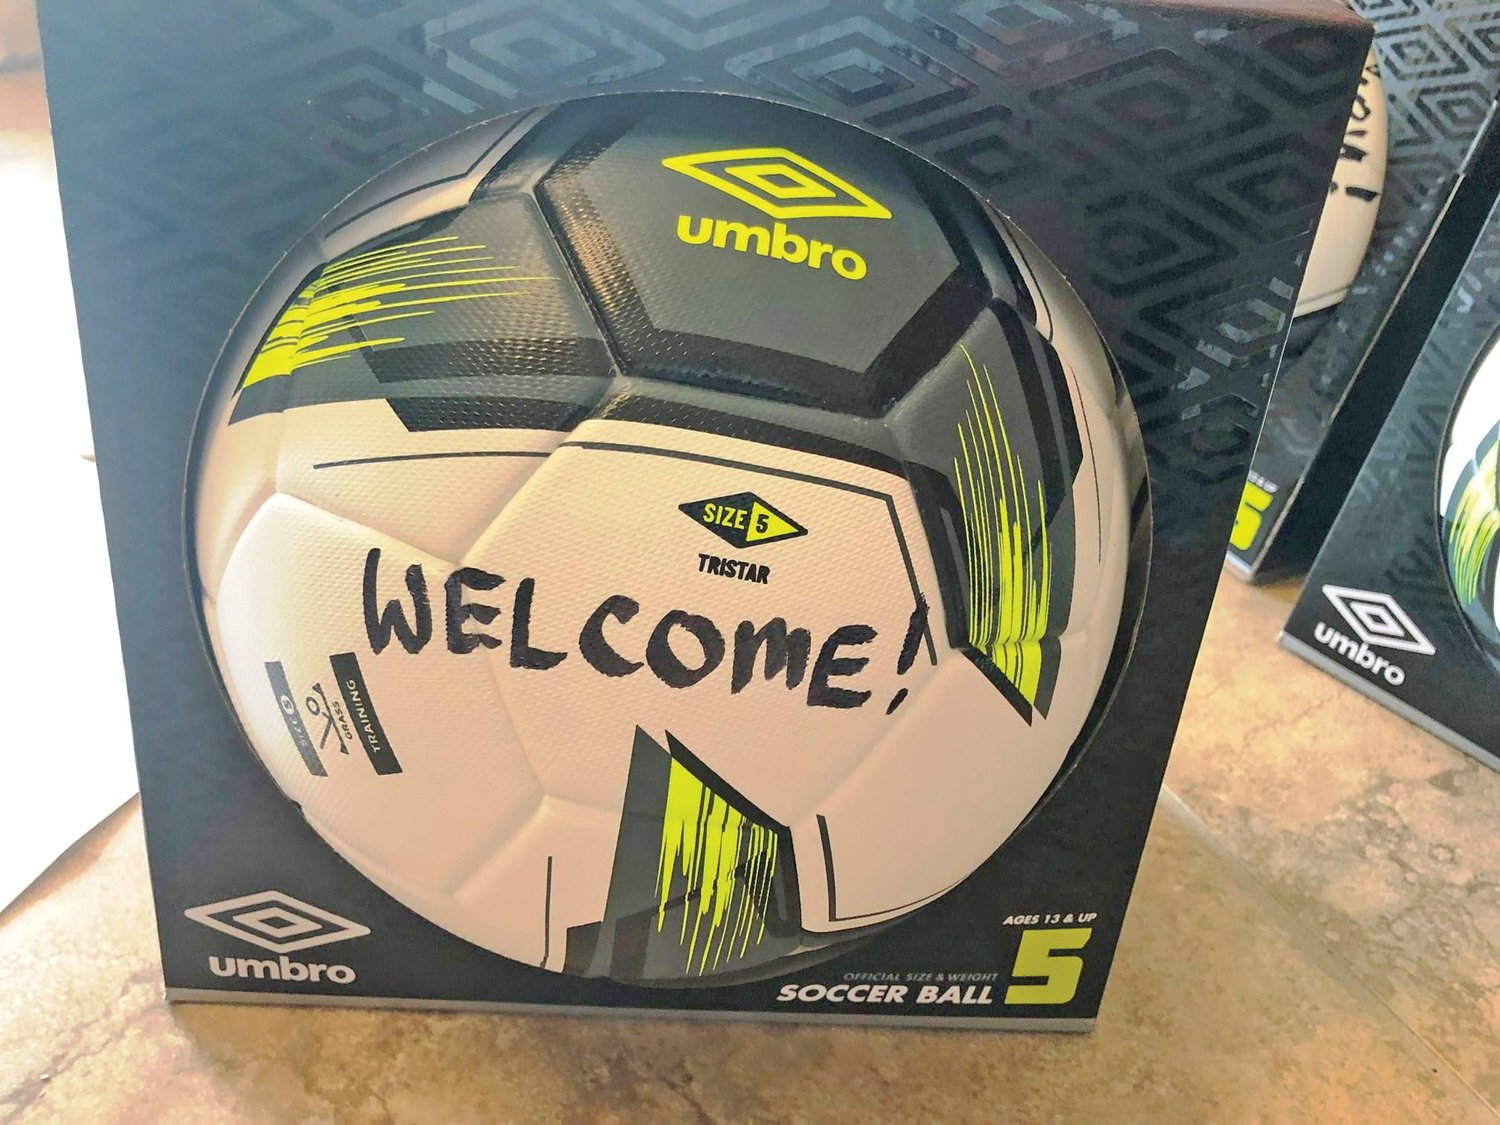 A message welcoming Afghan refugees is written on a soccer ball delivered to Camp Atterbury.